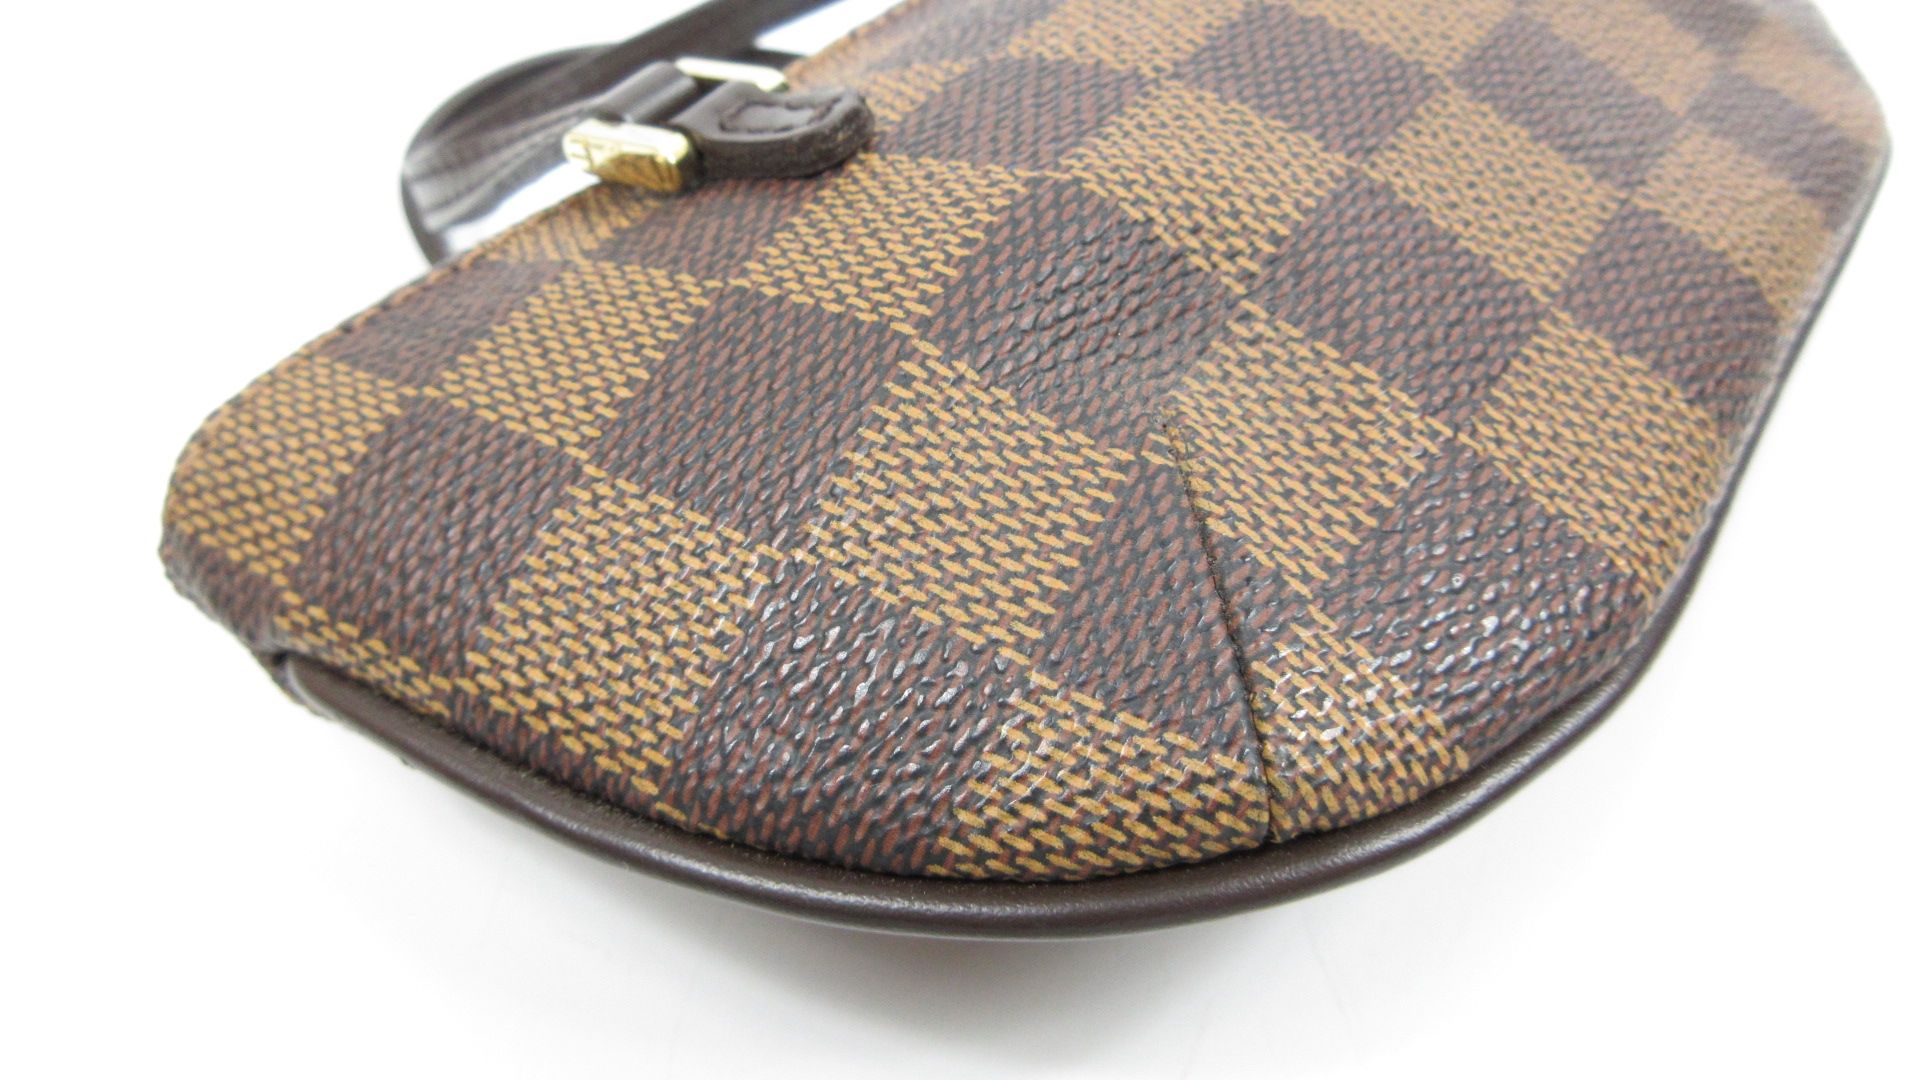 Pre Loved Louis Vuitton Manosque PM Damier Ebene Bag from UniKoncept in Waterloo